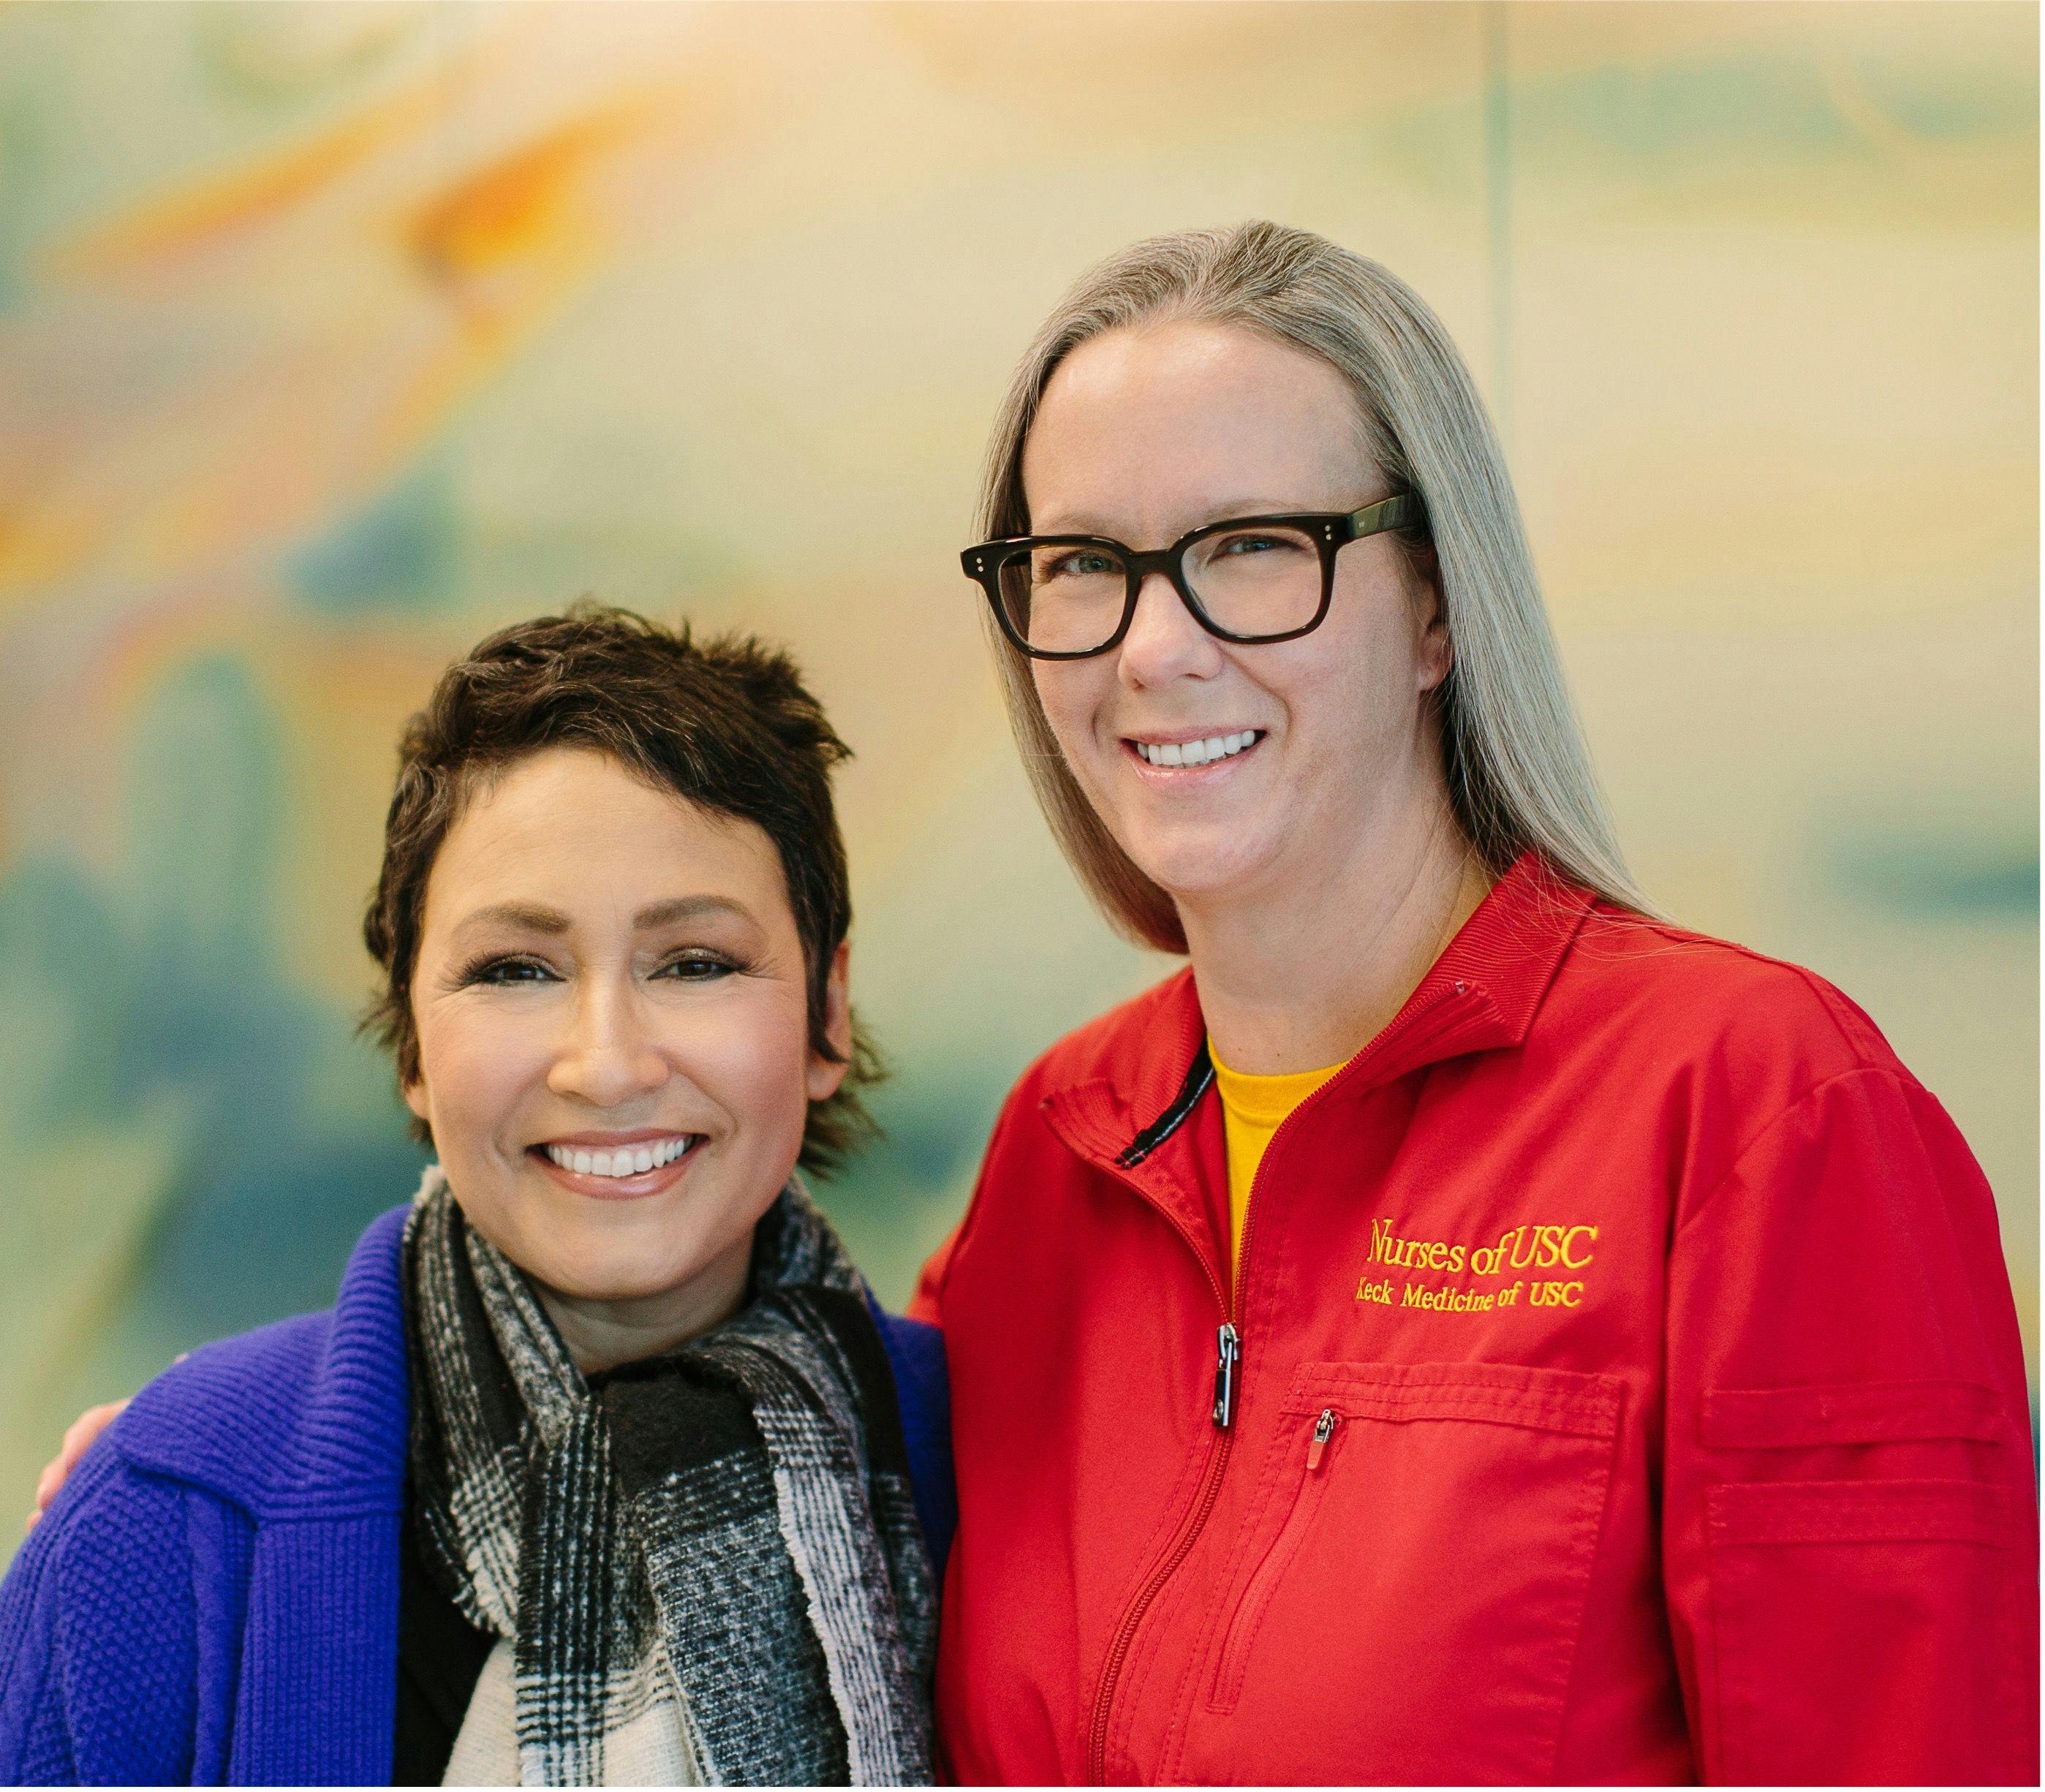 A cancer survivor and her oncology nurse smiling at the camera: From left: Teresa Carrillo and Carrie Williams, M.S.N./Ed, RN